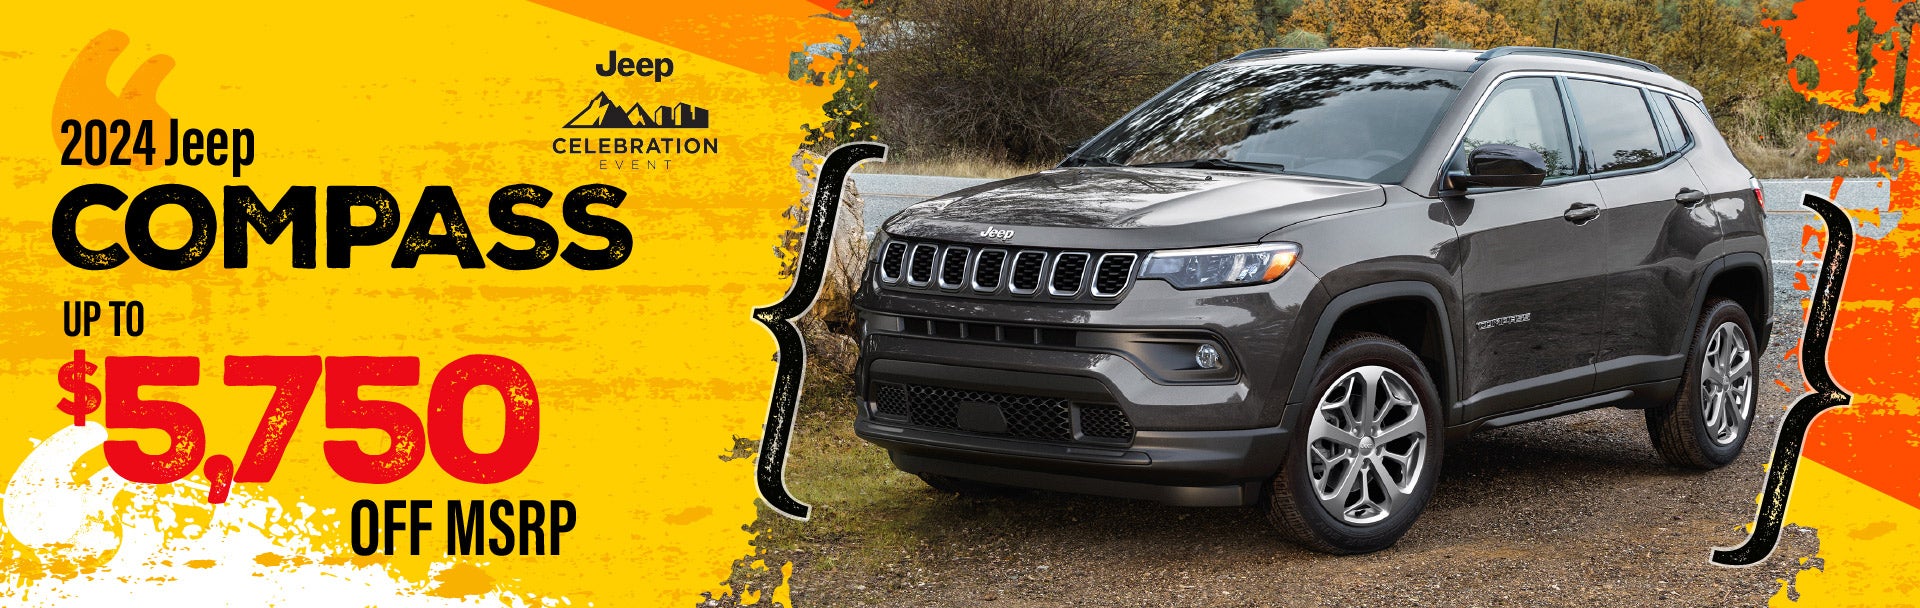 NEW Jeep Compass - save up to $5750